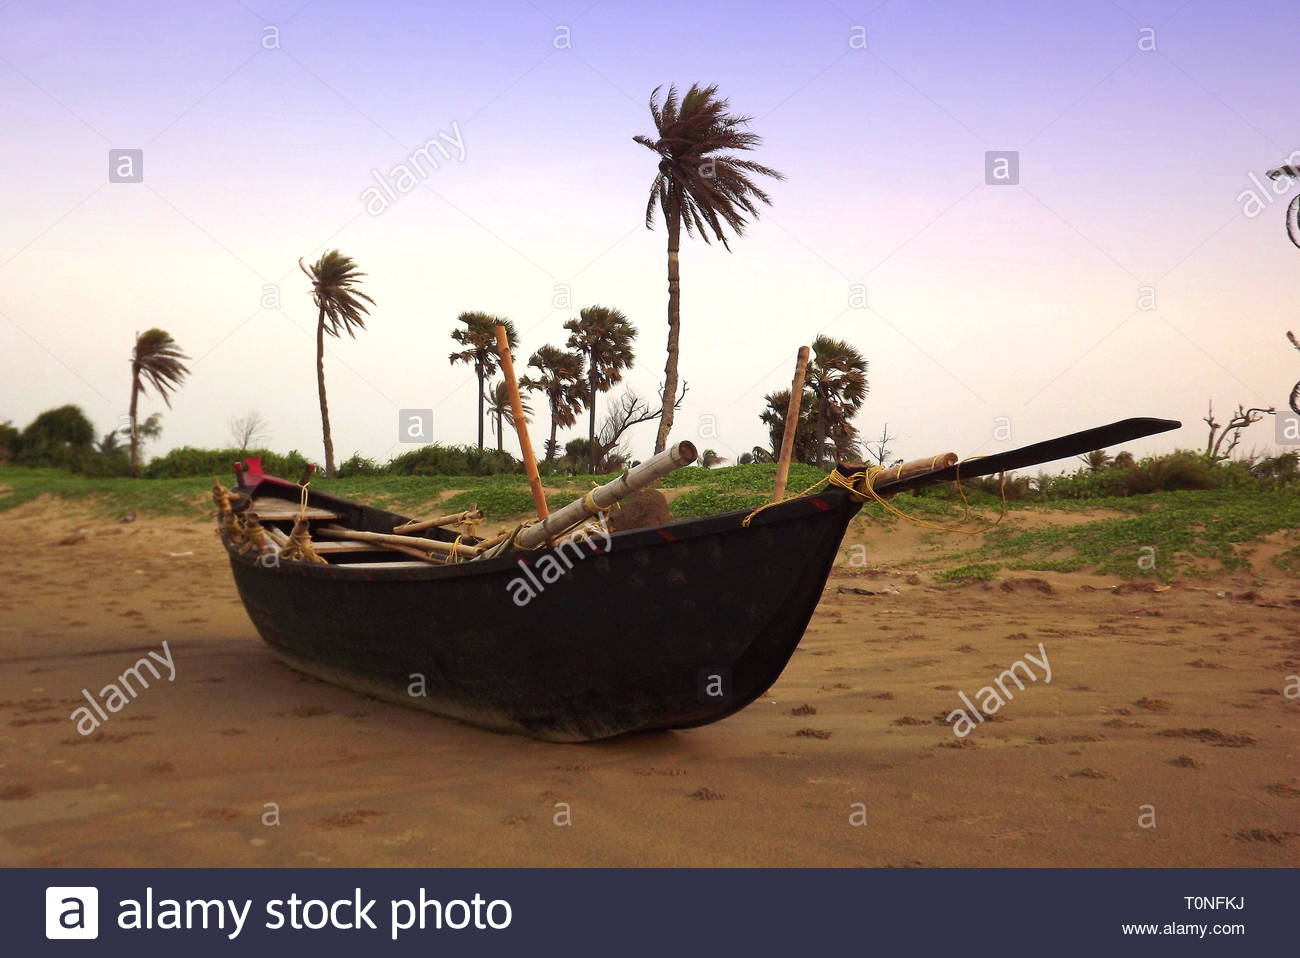 Boat on sea beach with picturesque background Stock Photo